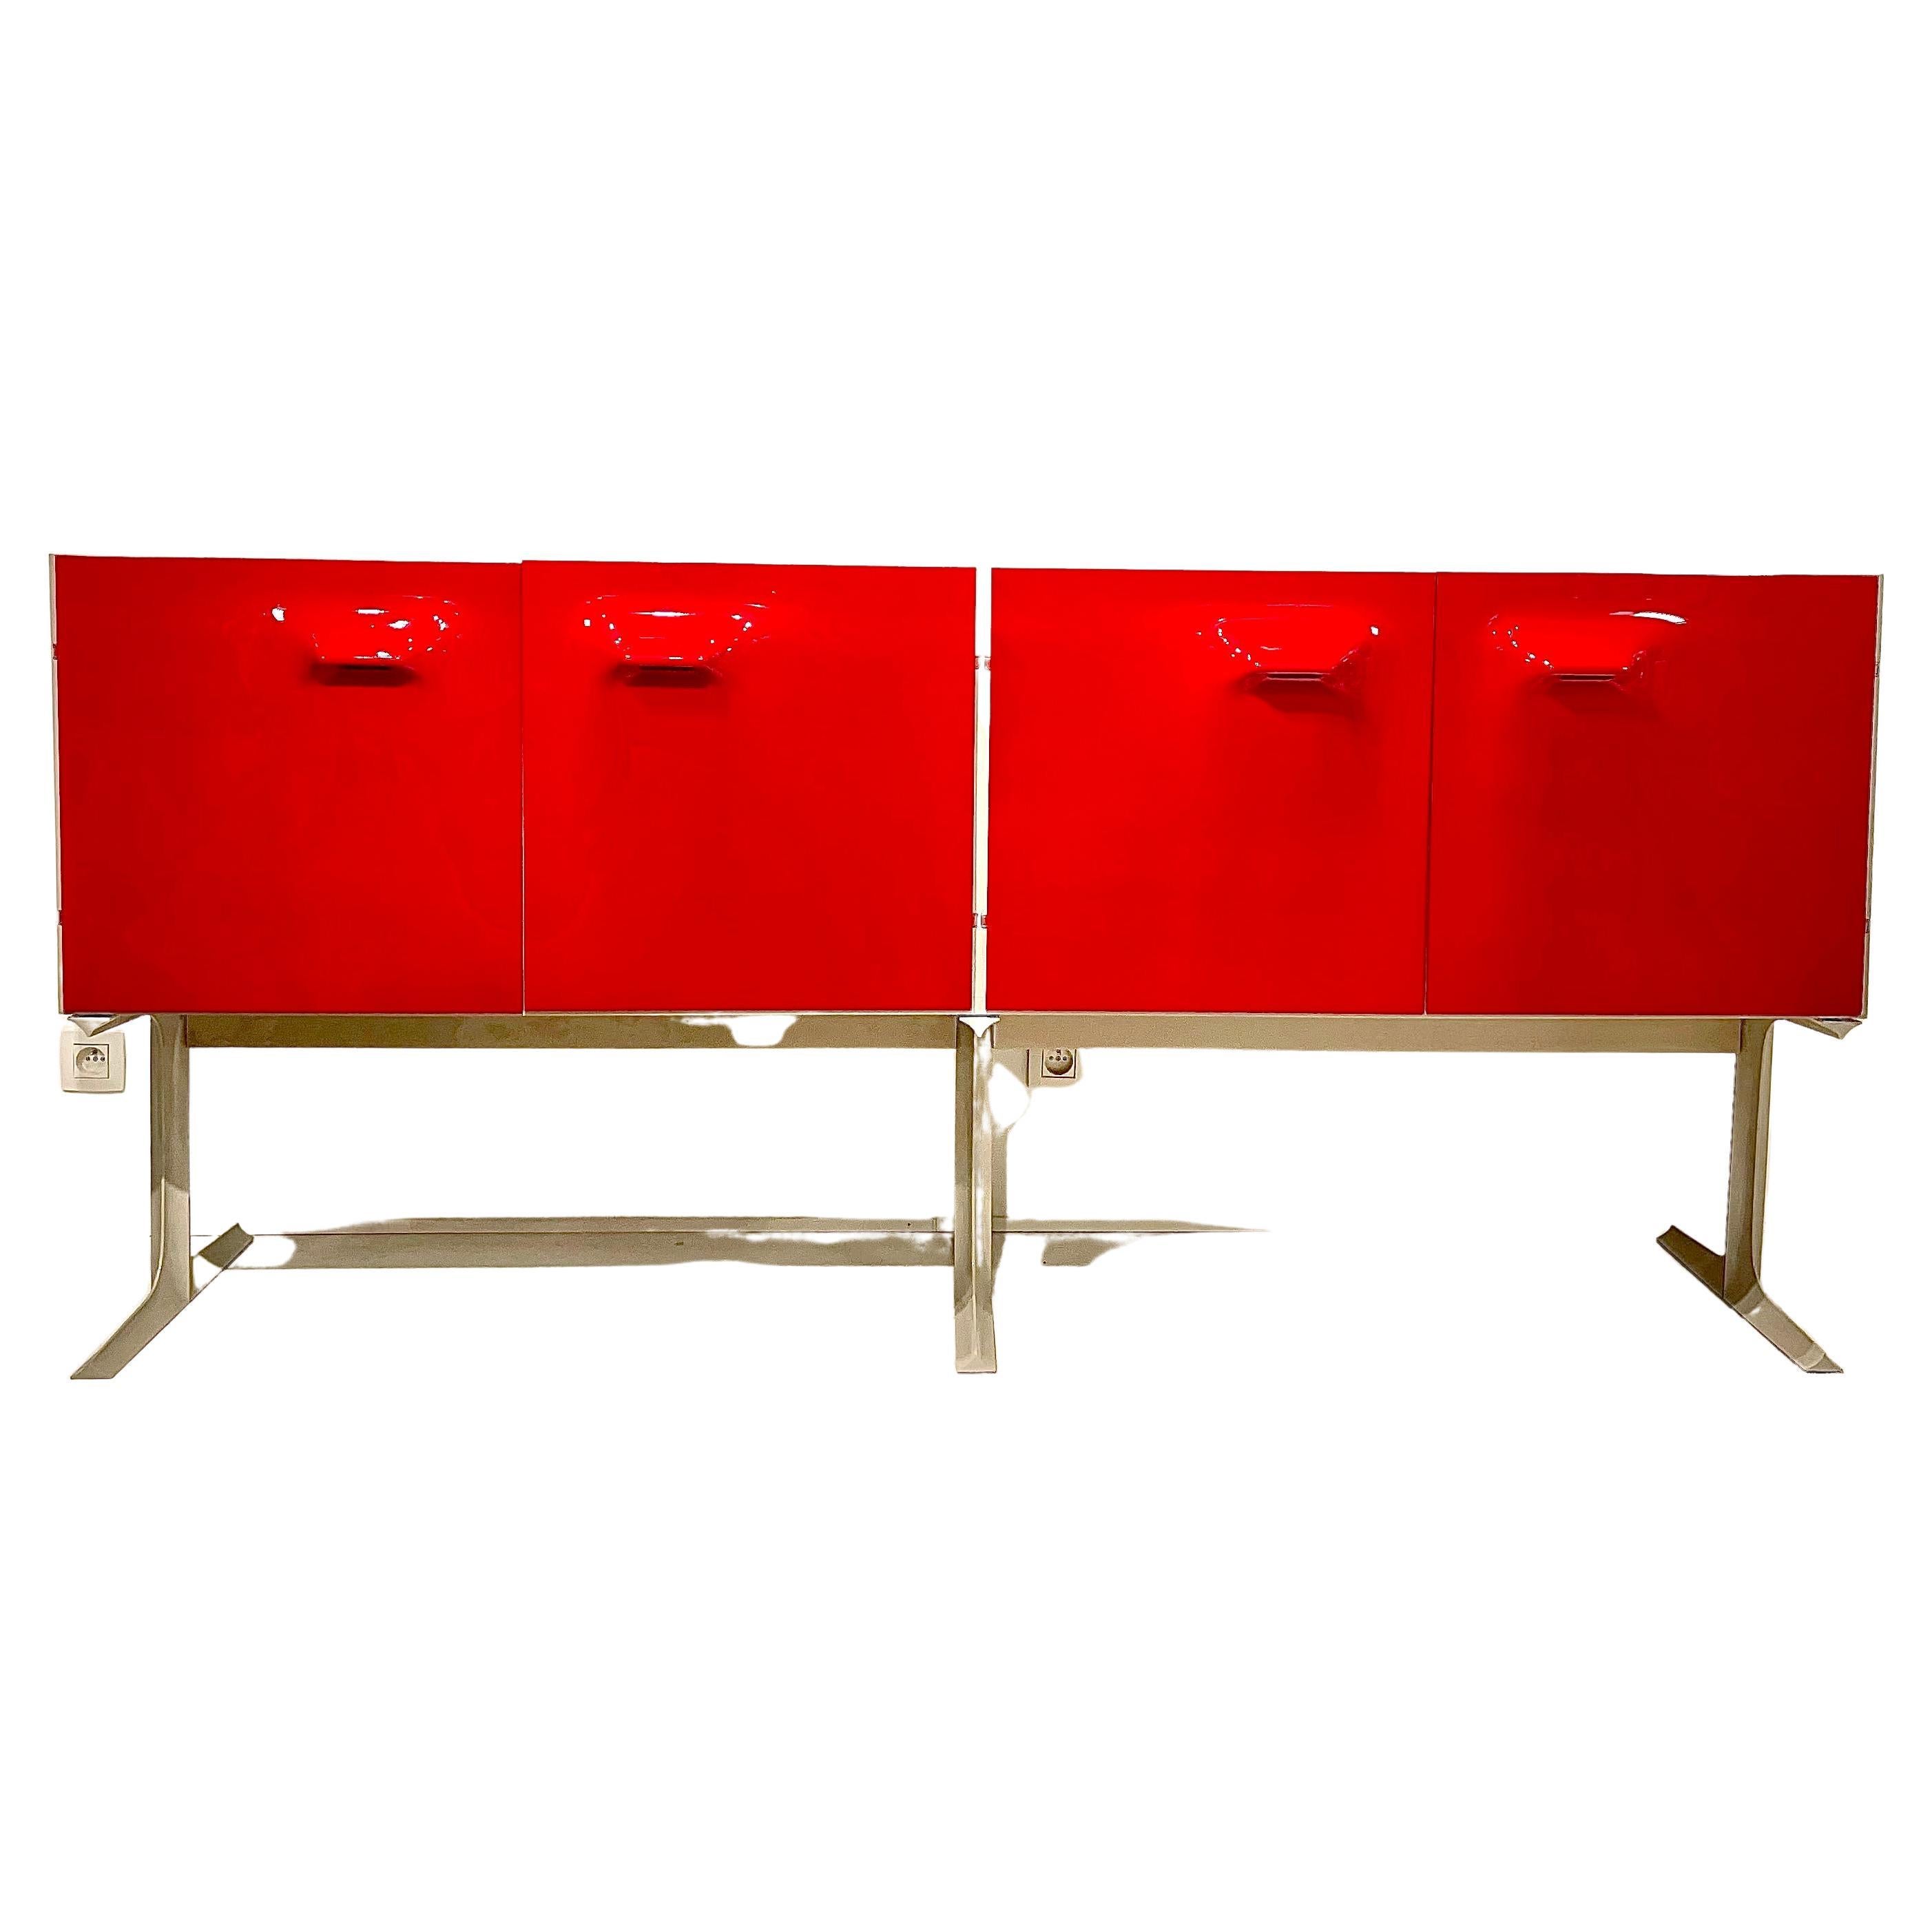 Sideboard designed by Raymond Fernand Loewy. France. C.E.I. - Compagnie d'Esthetique Industrielle, 1968. The DF-2000 sideboard with four drawers and three doors each covered in a moulded plastic facia in red . The piece also incorporates two